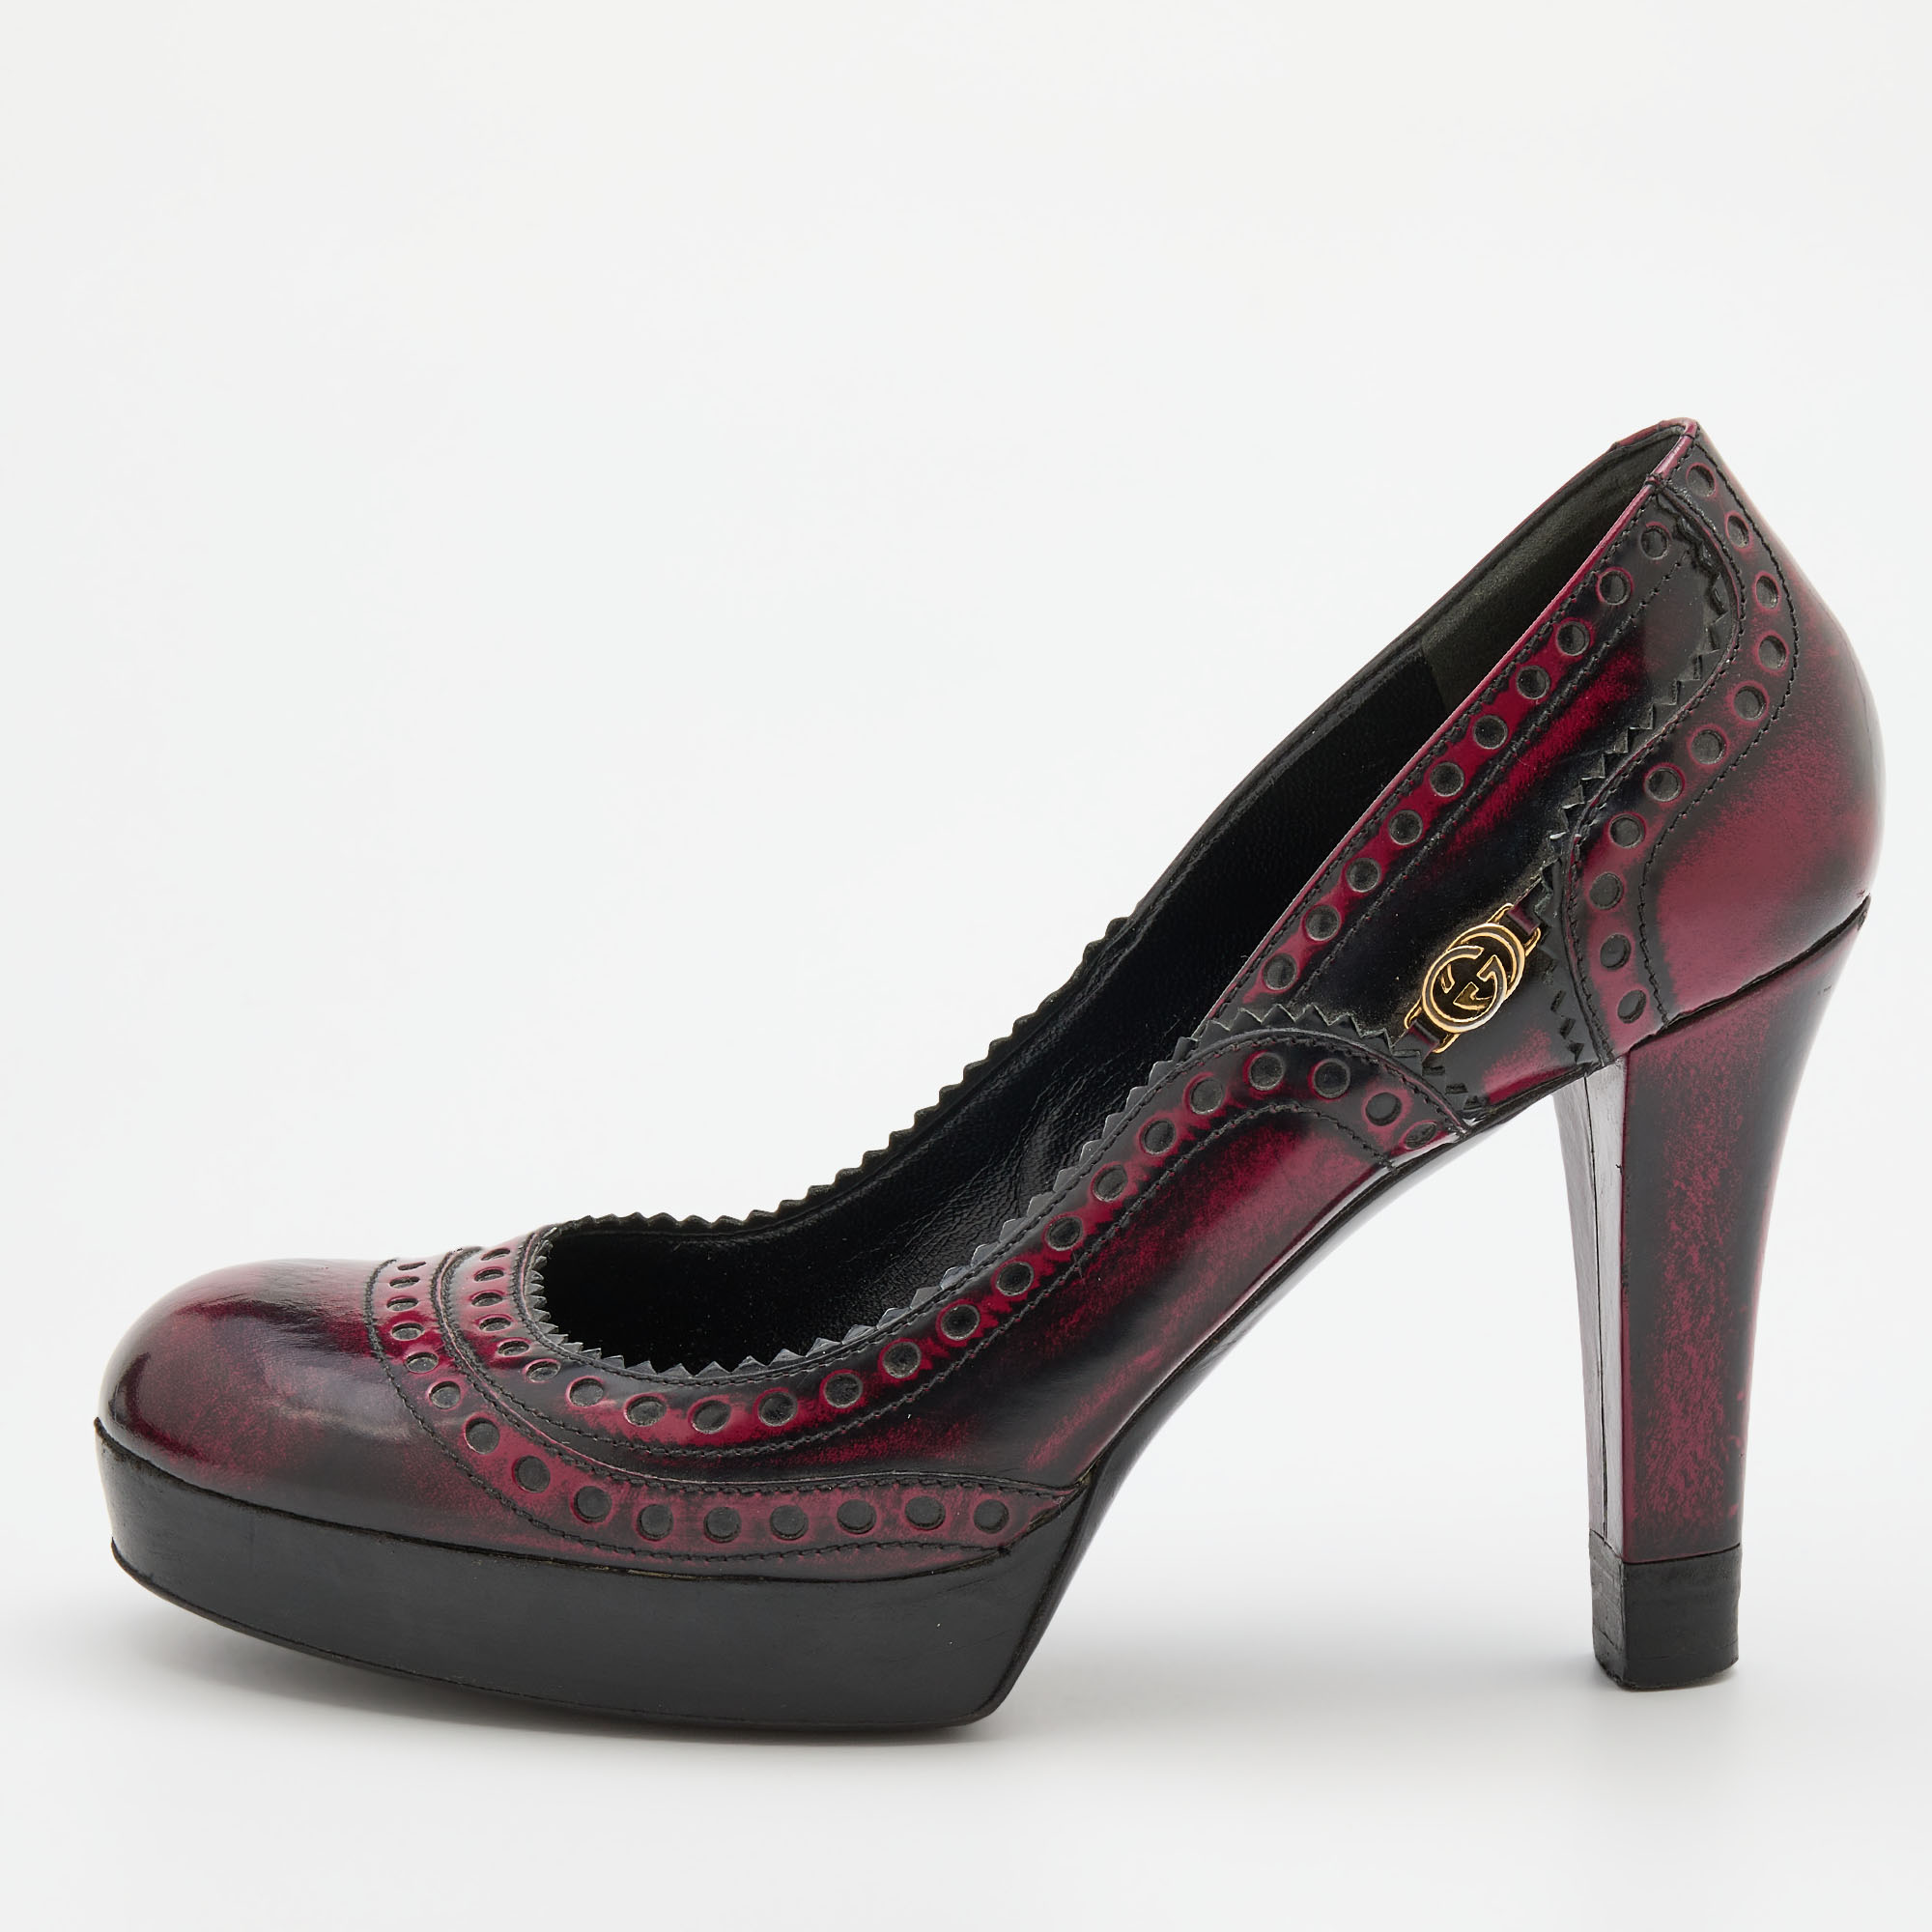 Pre-owned Gucci Black/red Two-tone Brogue Leather Platform Pumps Size 40.5